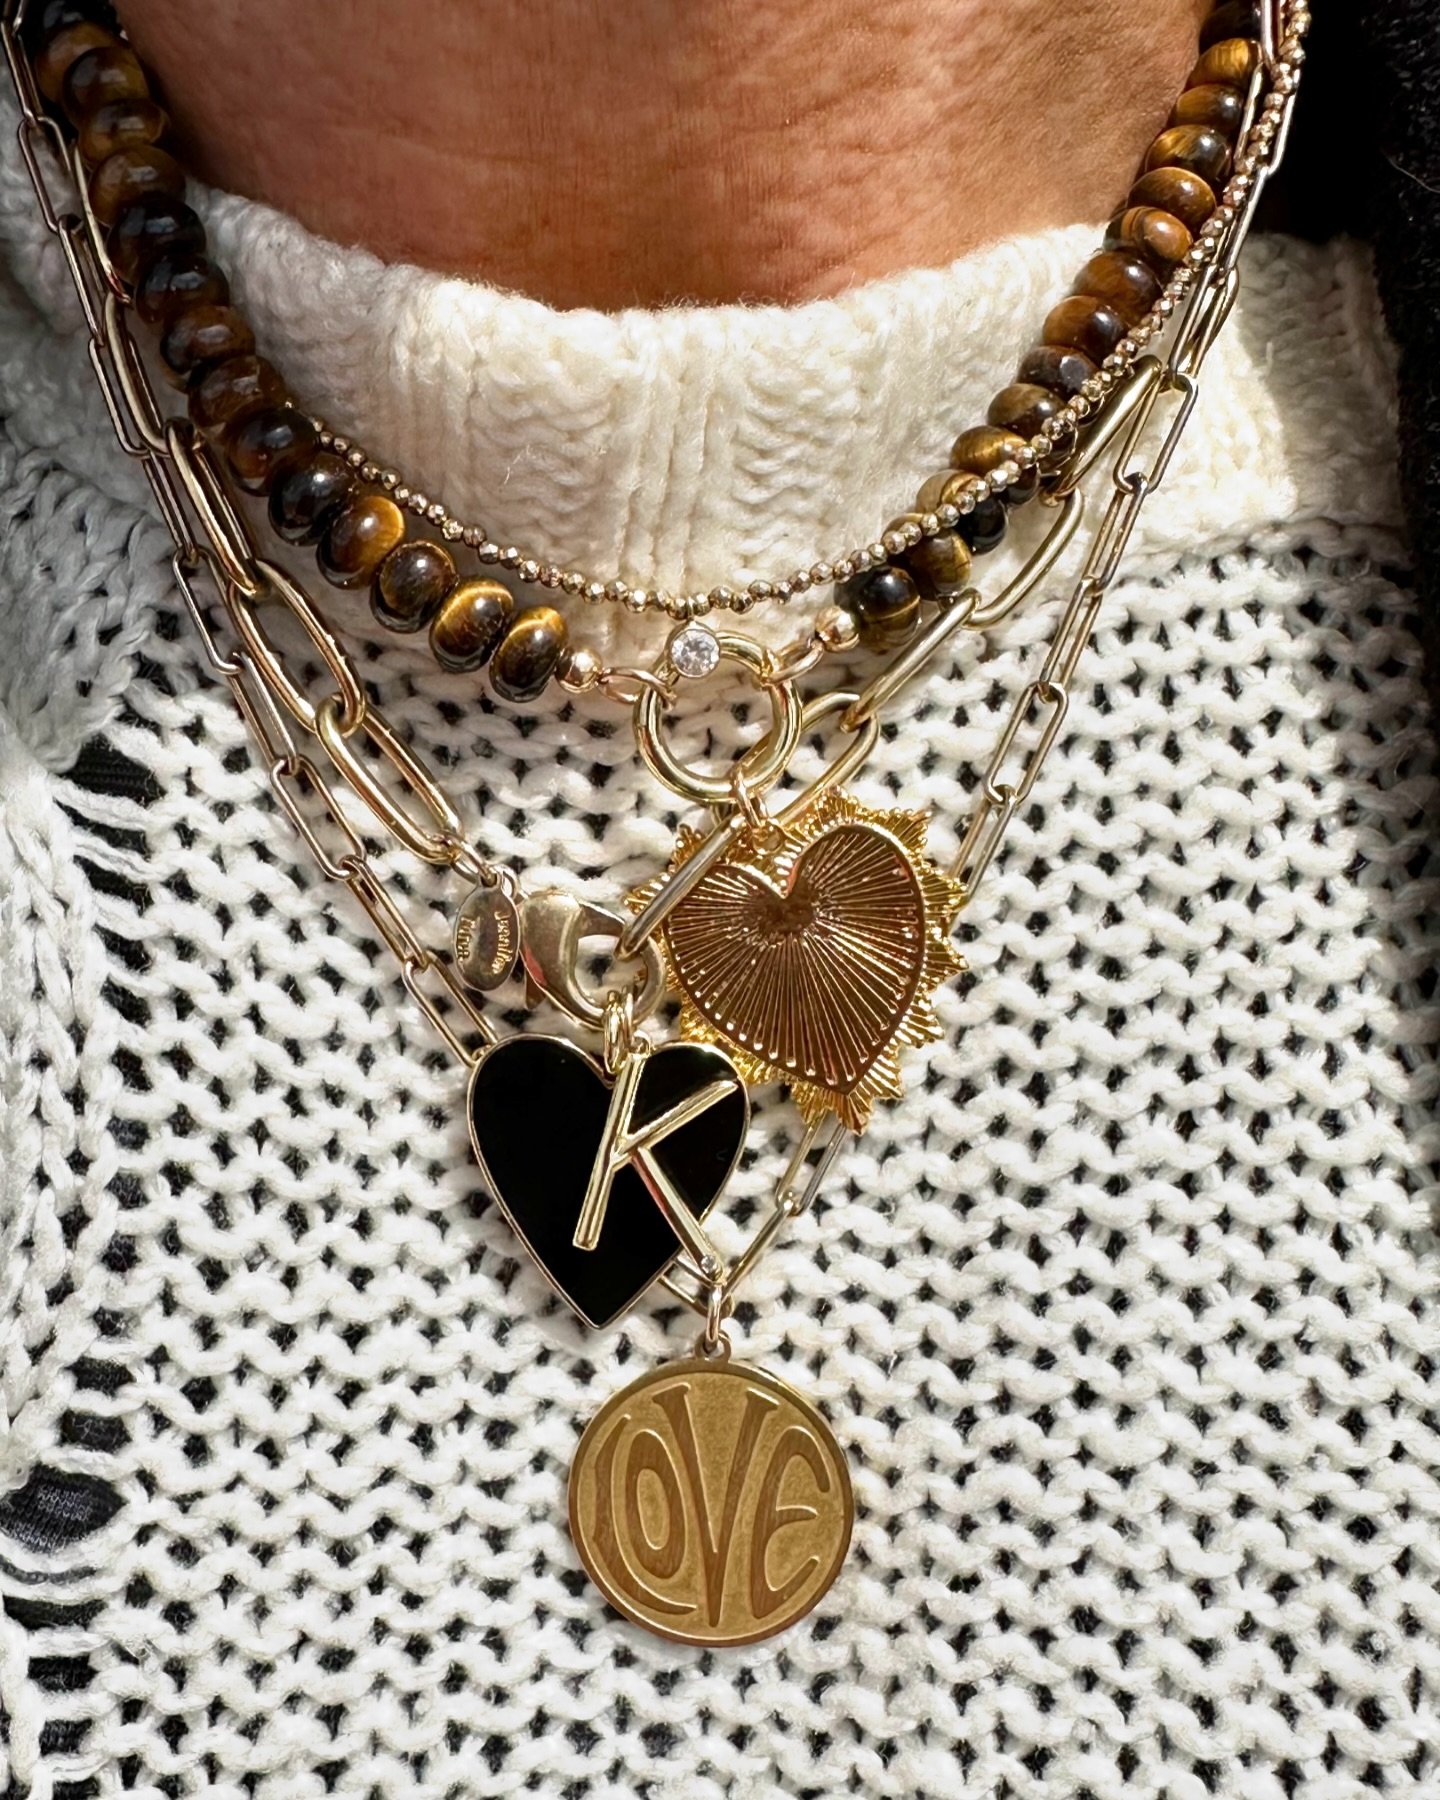 Layering hero ~ a great visual to show you how to stack your chains. Add texture and verve with beads and charms and varying chains  @kara_dellovo 💓#layeringnecklaces #goldjewelry #sanfrancisco #fairewholesale #jewelry #jewelrydesigner #heartpendant